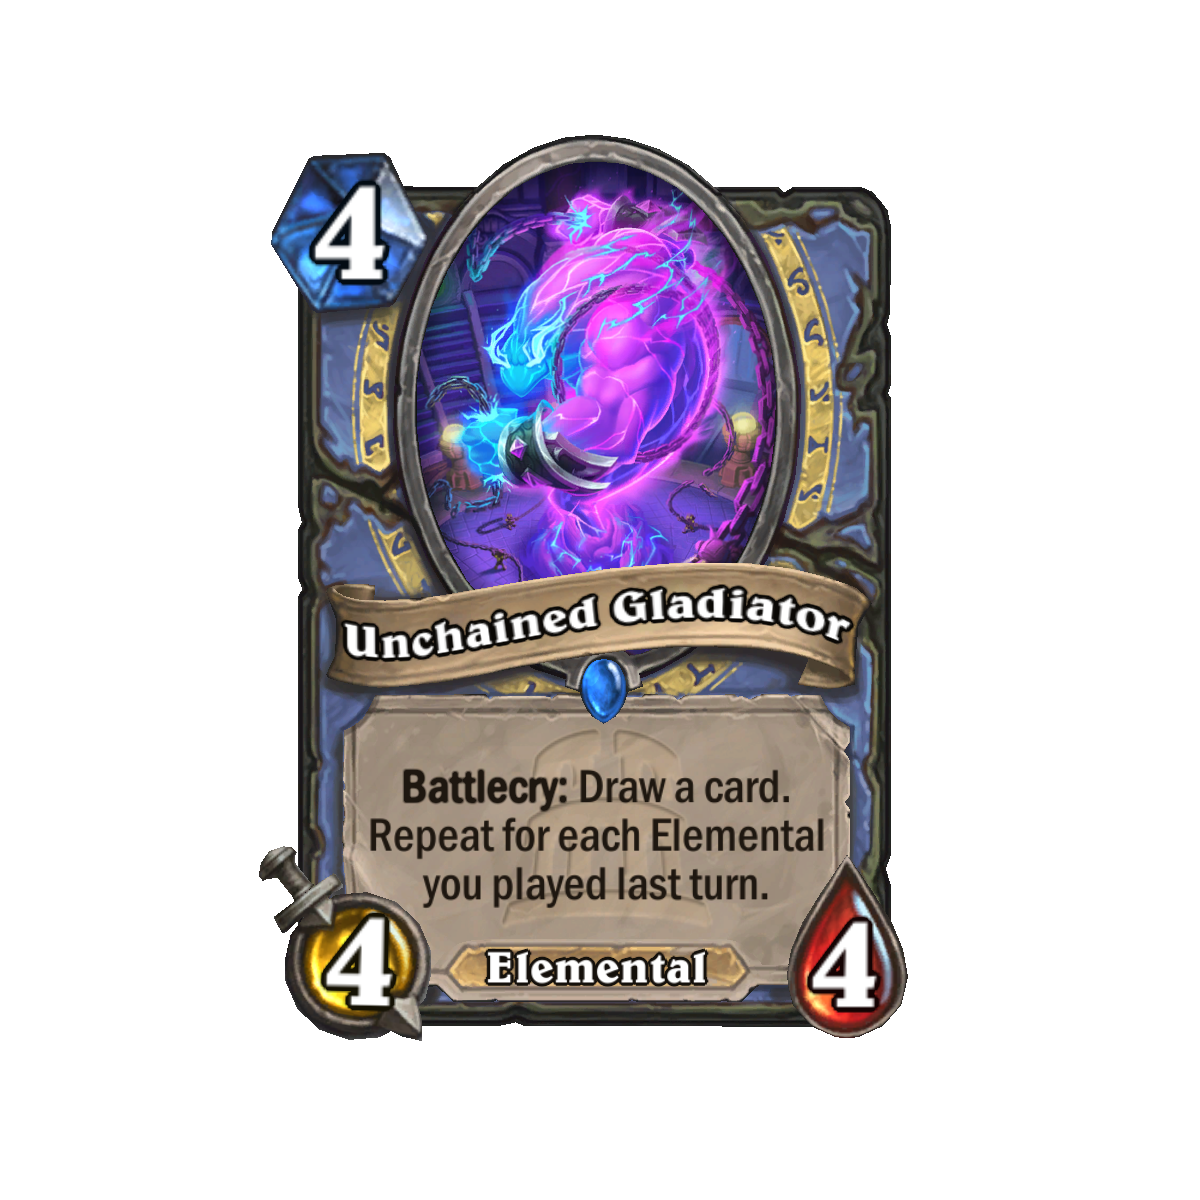 Hearthstone TITANS Card Reveal - Unchained Gladiator